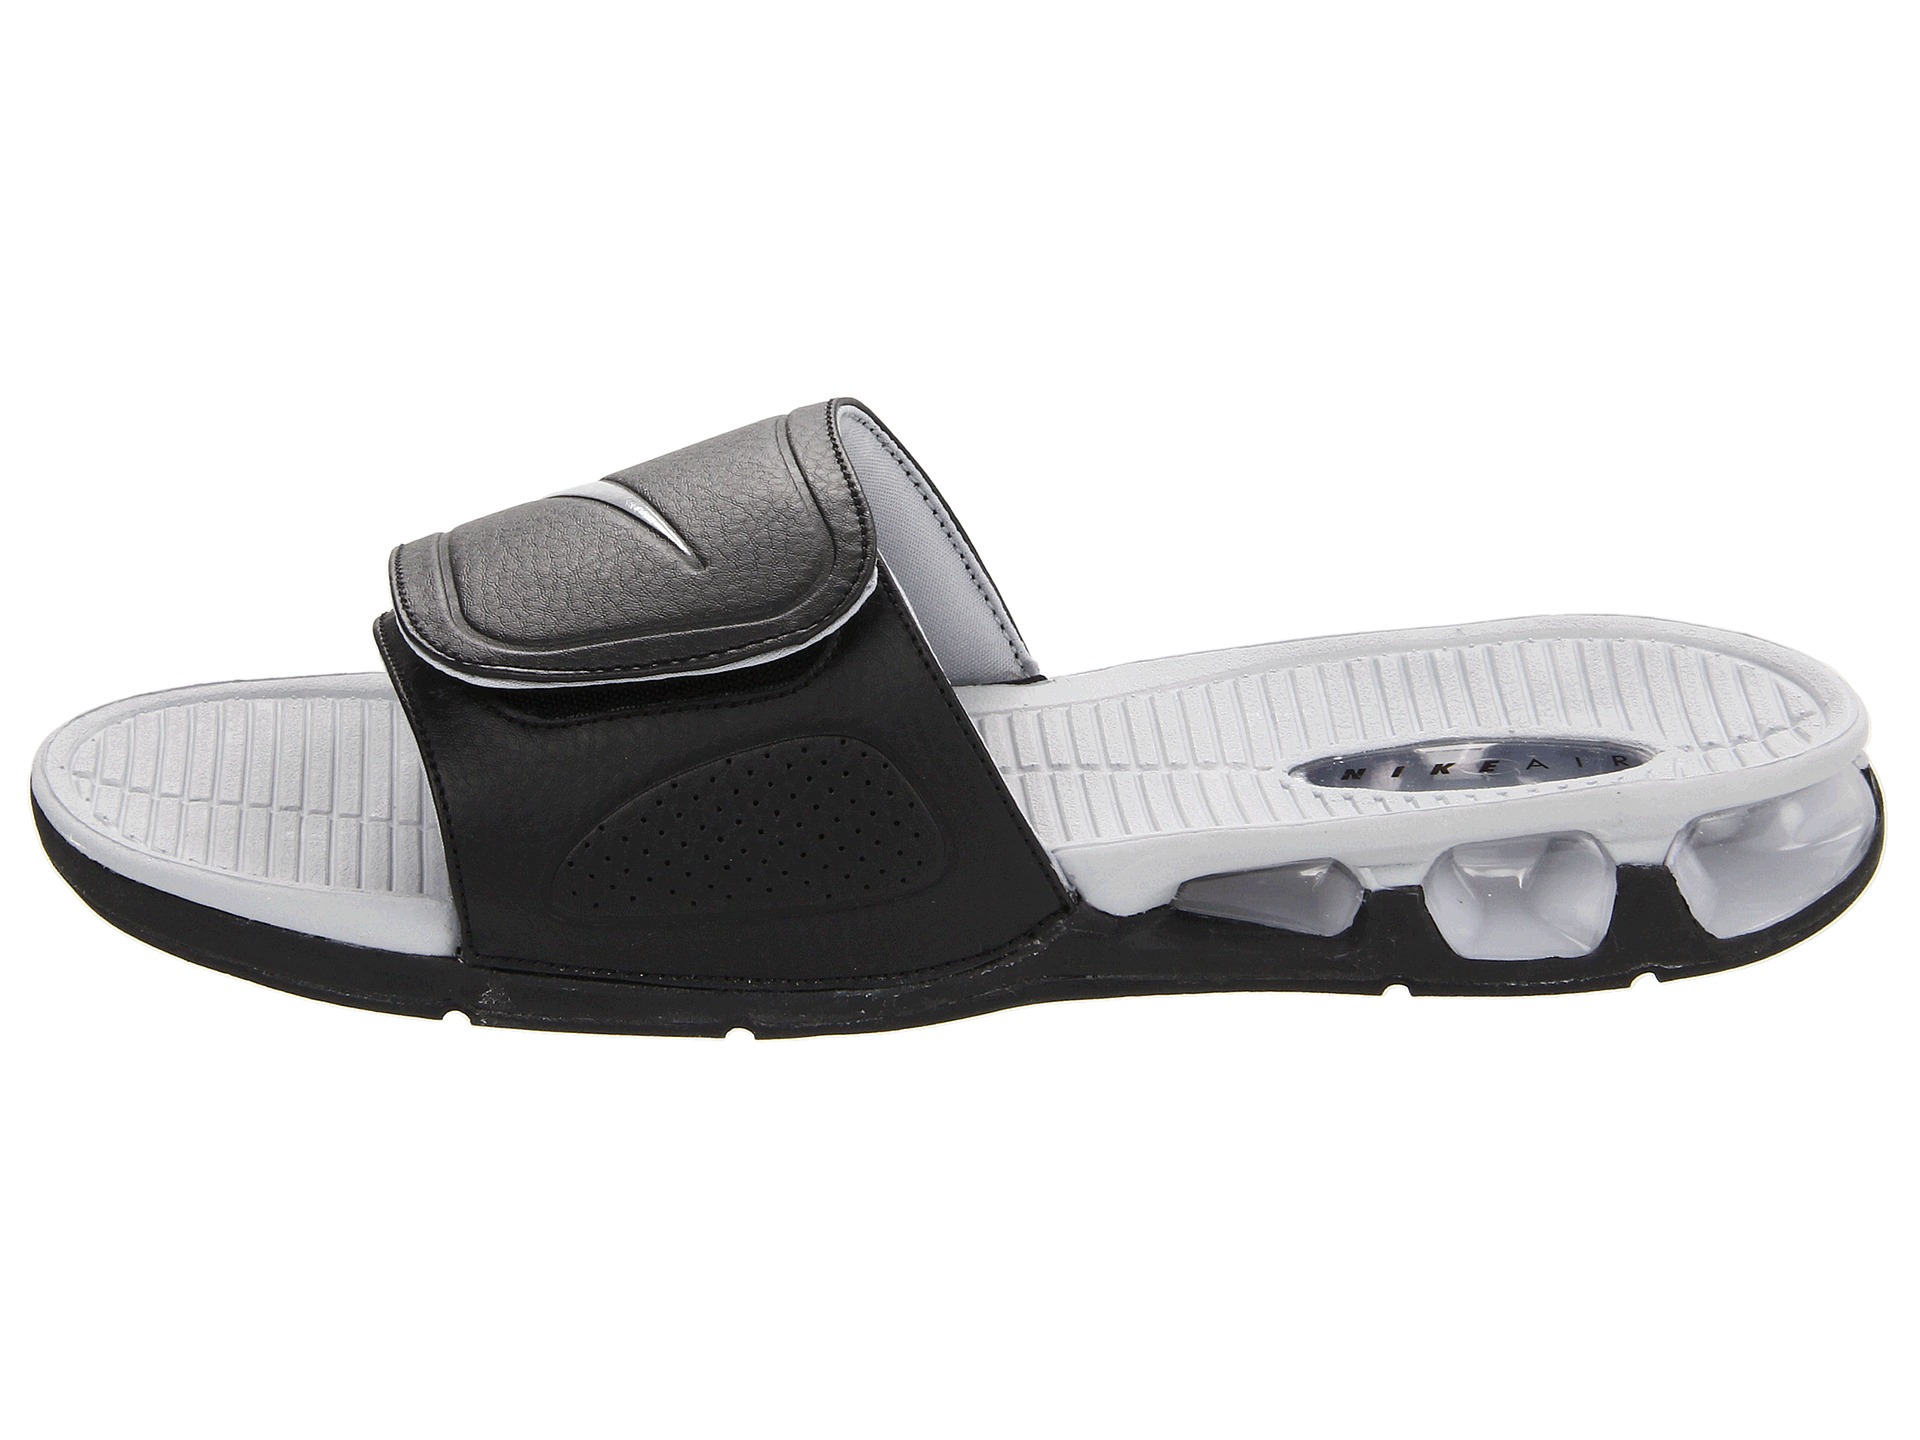 nike sandals with air bubble and straps